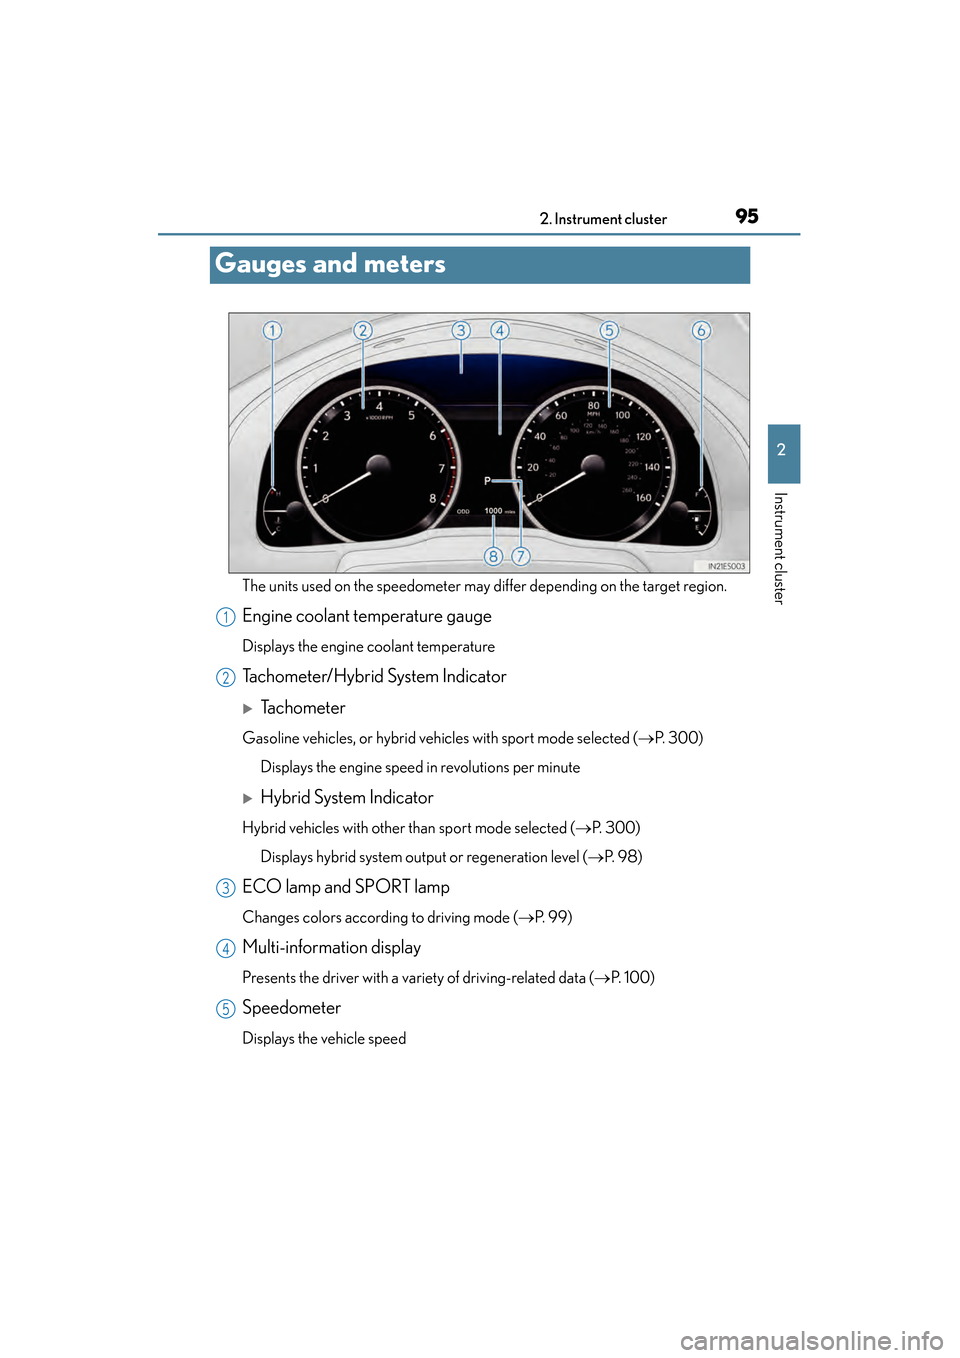 Lexus ES300h 2014  Owners Manual 95
ES350_300h_OM_OM33A60U_(U)
2. Instrument cluster
2
Instrument cluster
Gauges and meters
The units used on the speedometer may differ depending on the target region.
Engine coolant temperature gauge